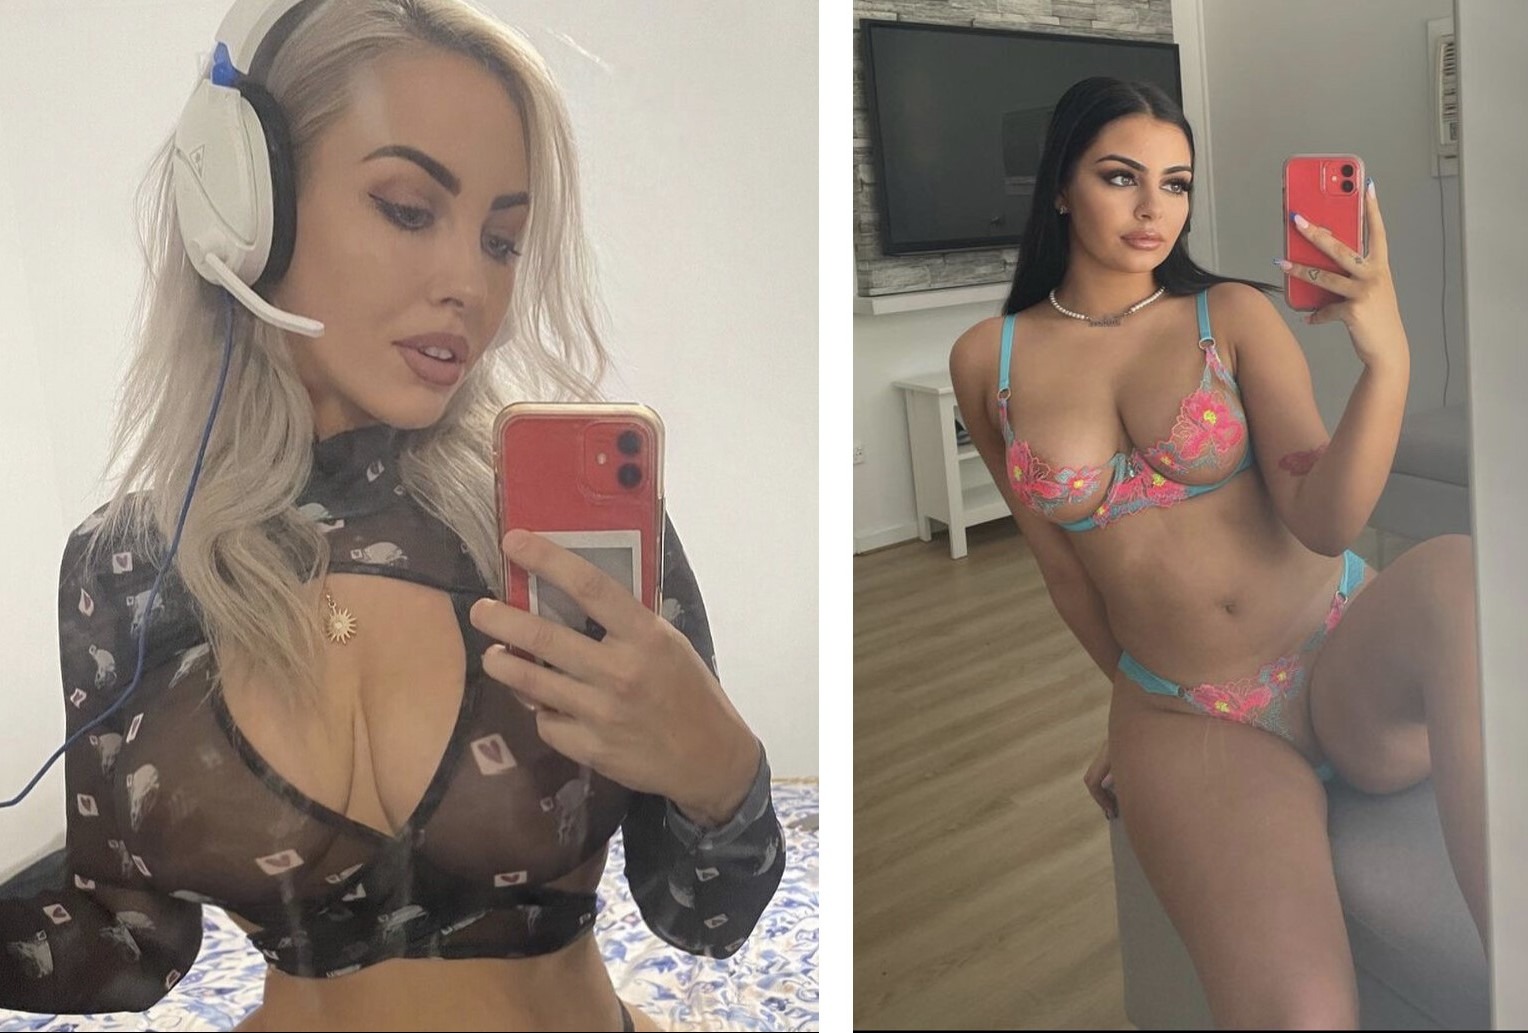 Evie leana onlyfans